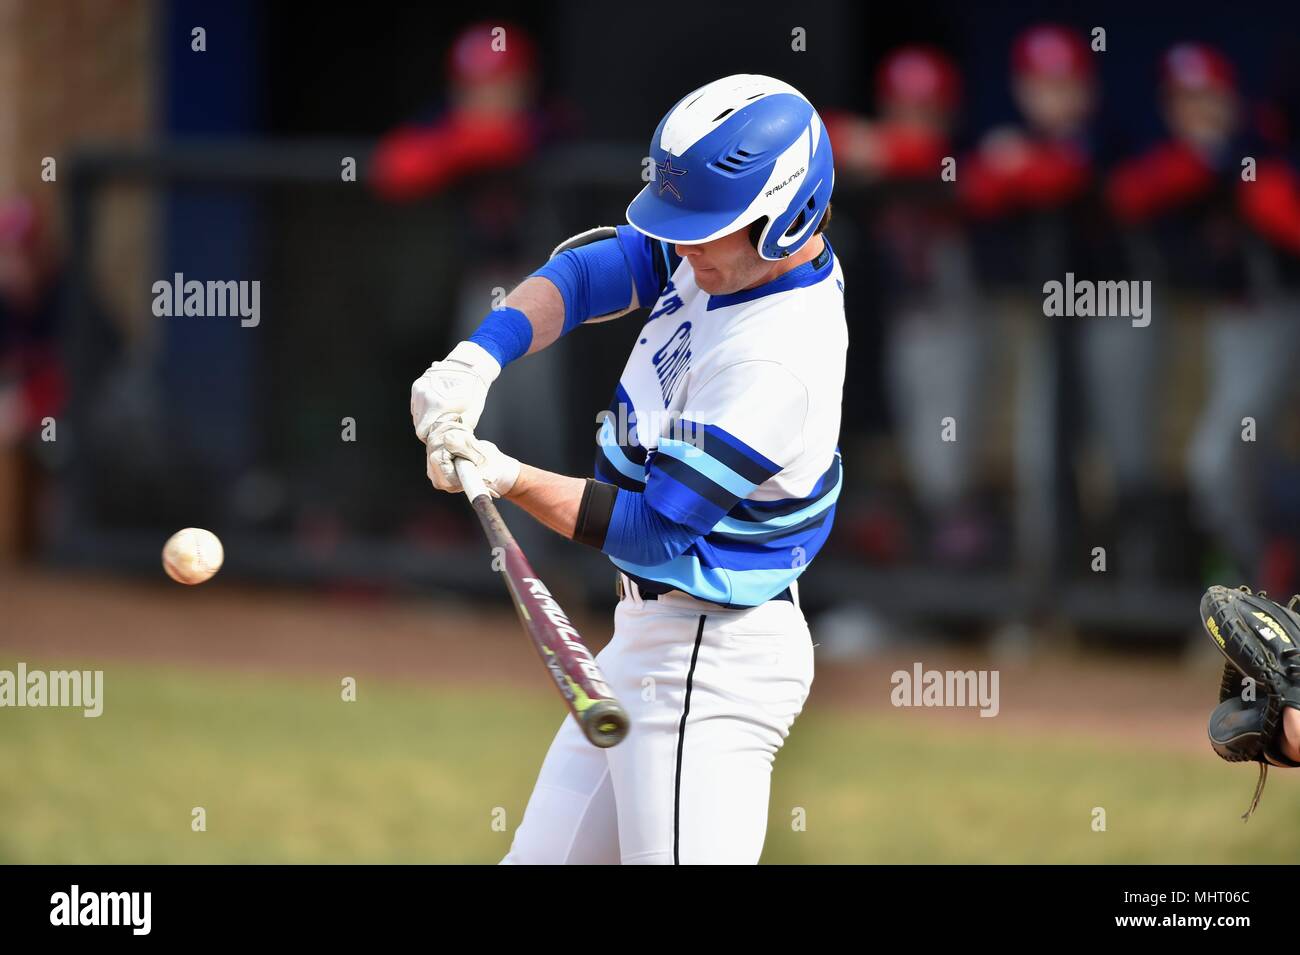 Batter swinging at a pitch during a high school baseball game. USA. Stock Photo